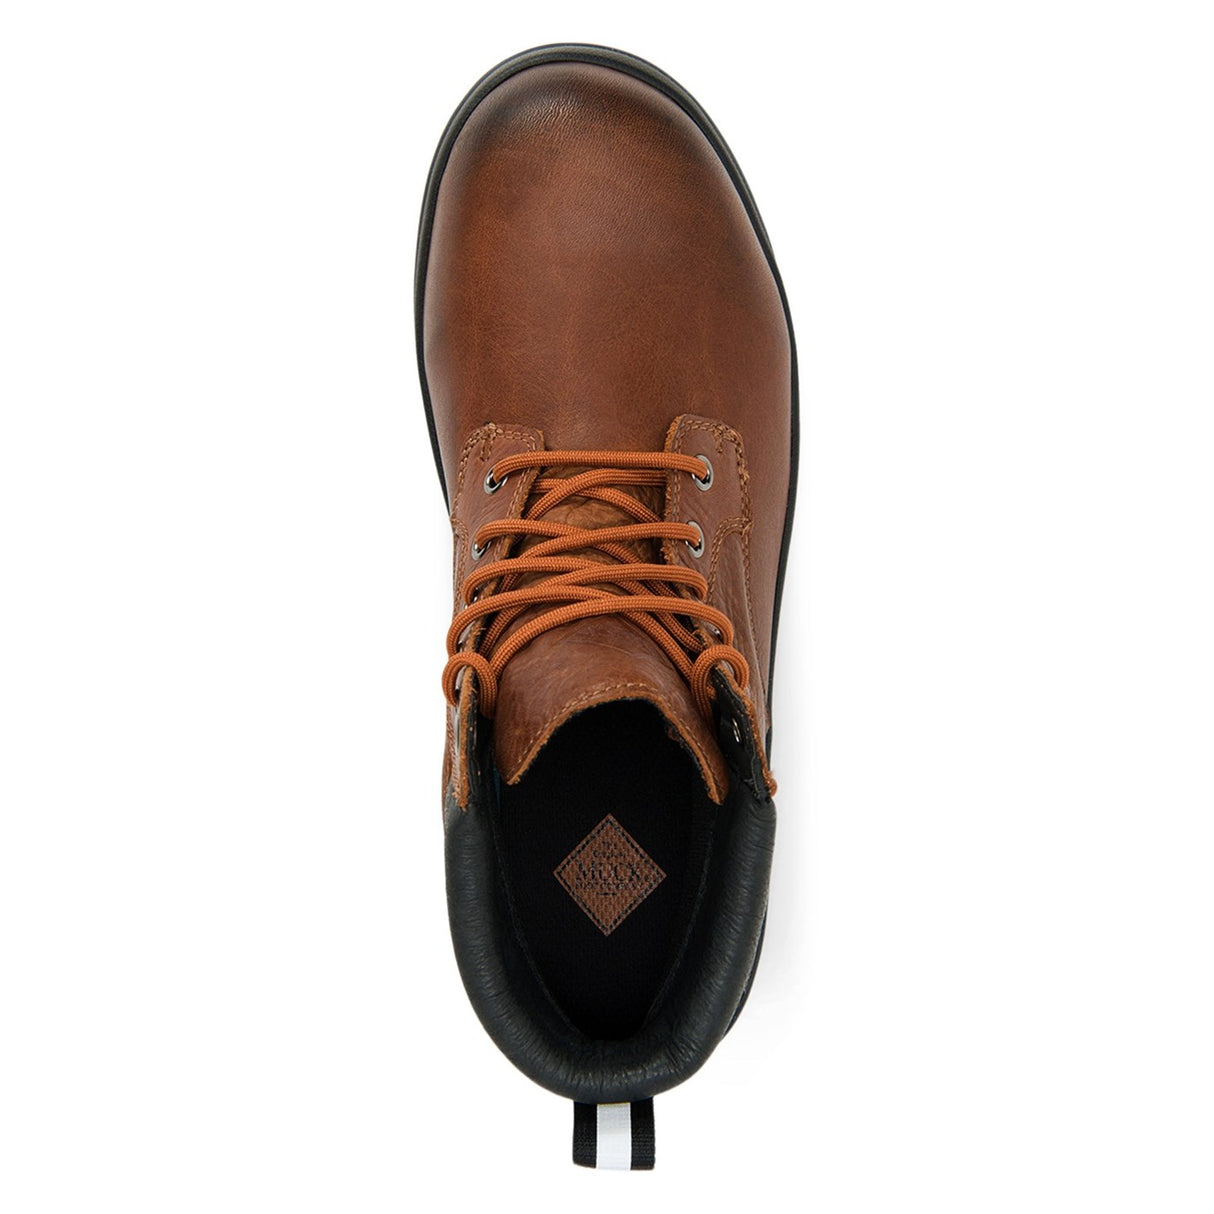 Men's Chore Farm Leather Lace-Up Safety Boots Caramel